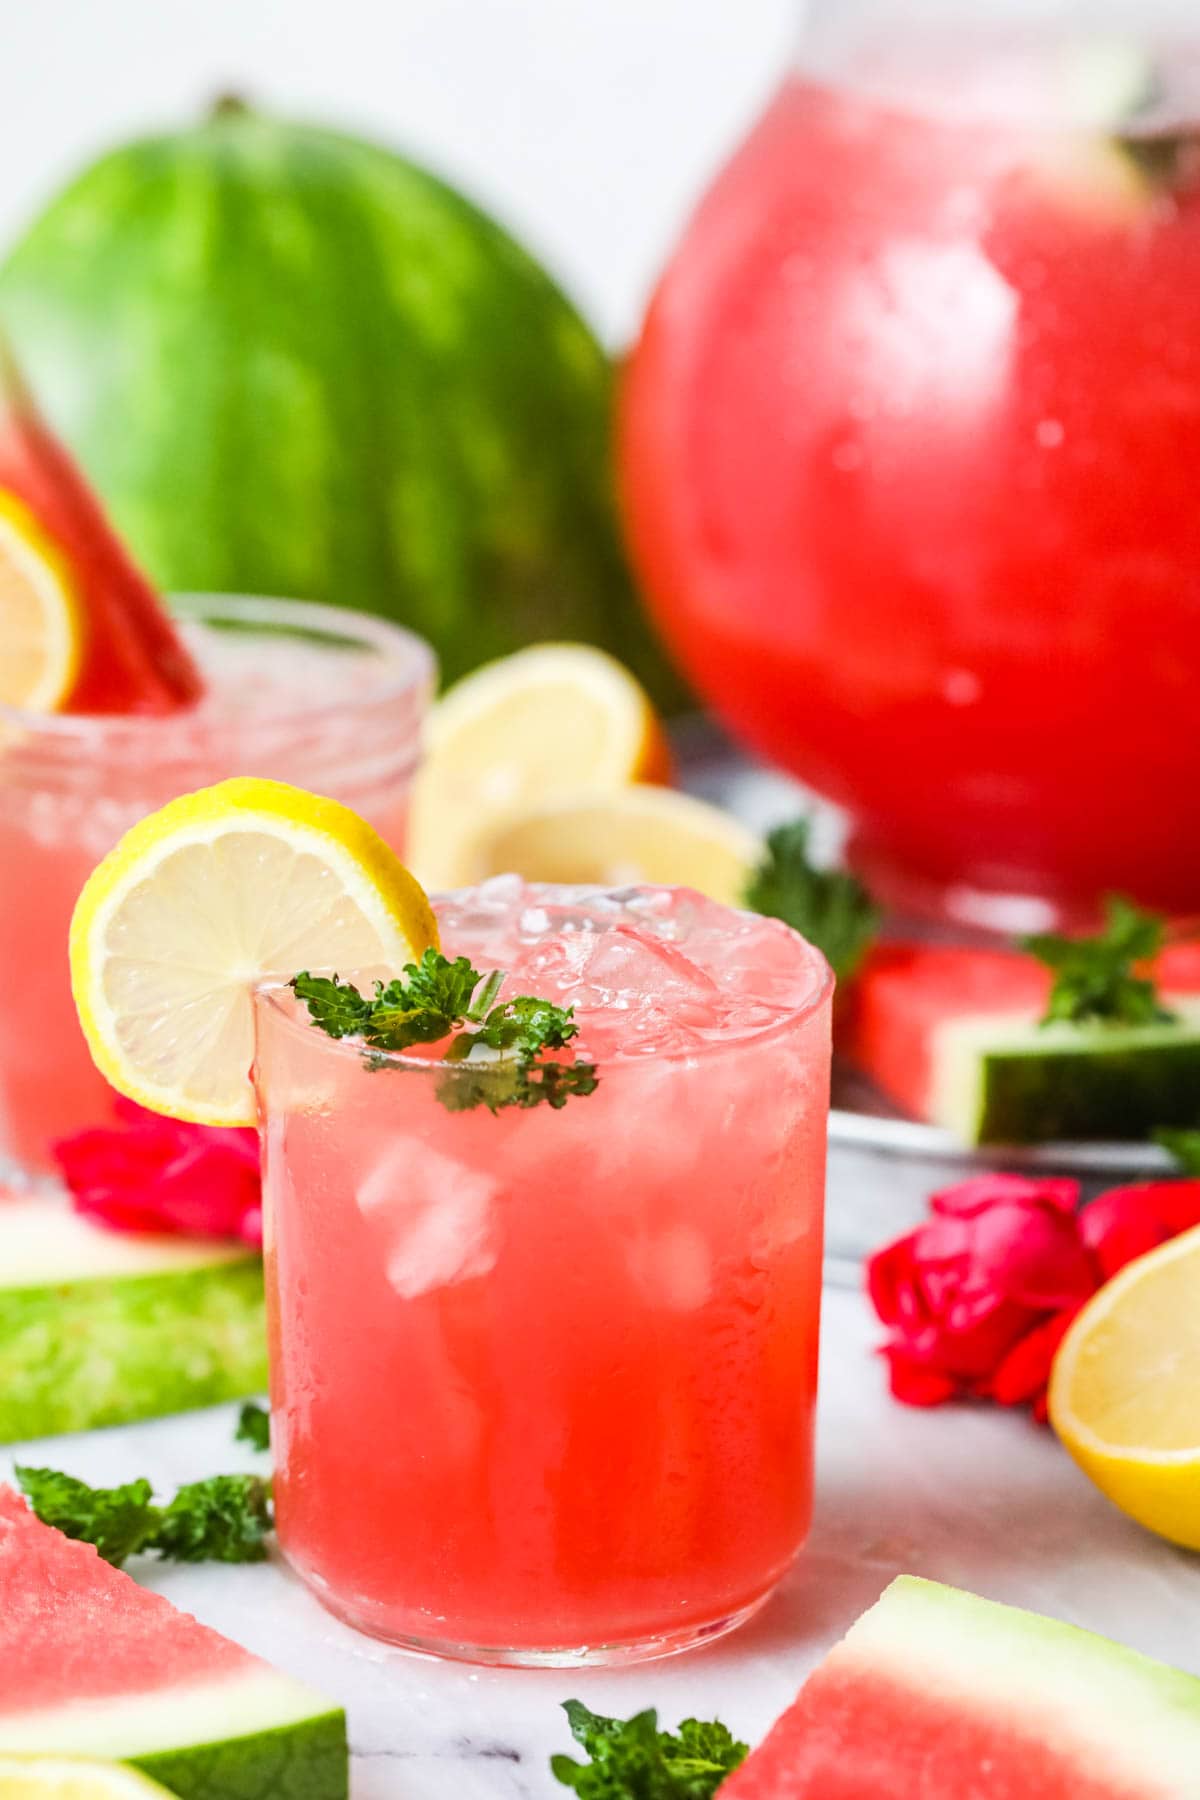 Glass of watermelon lemonade garnished with fresh mint and lemon slices.